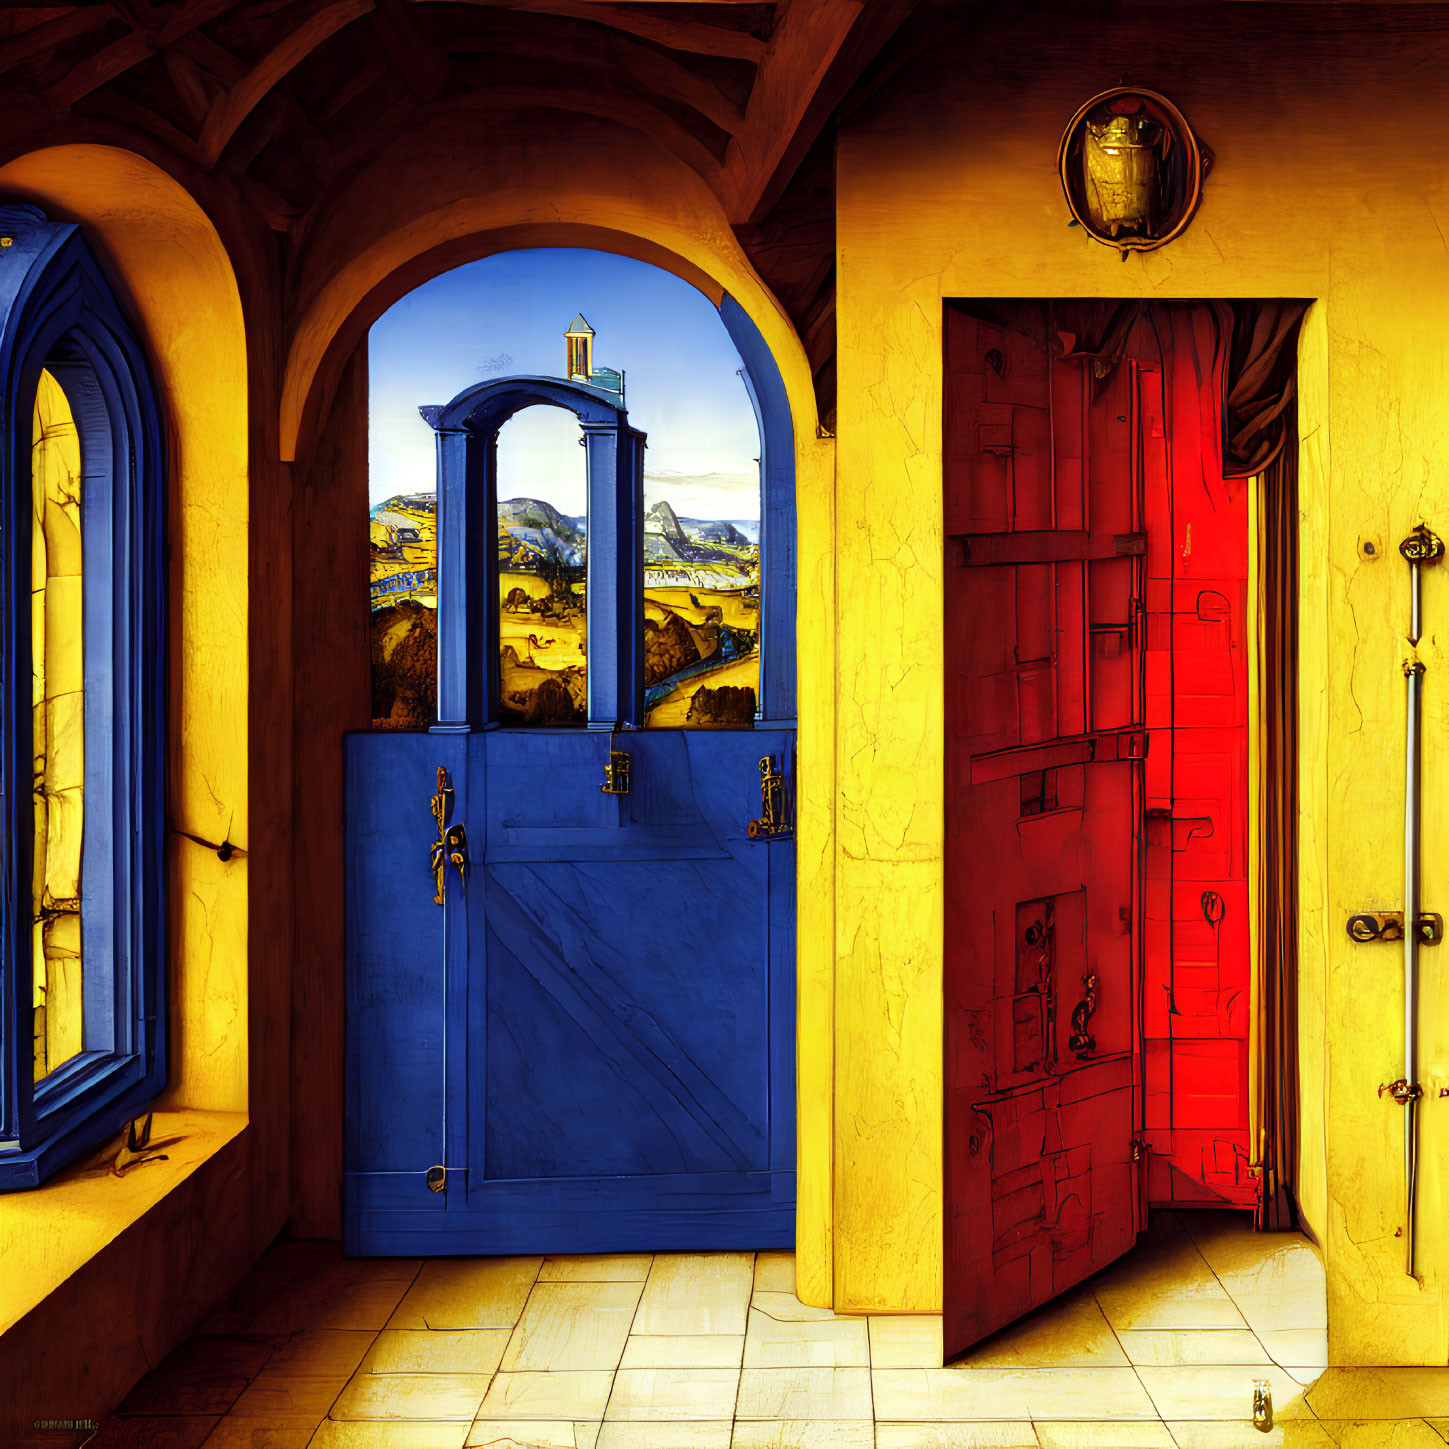 Colorful illustration of room with blue door and red wardrobe